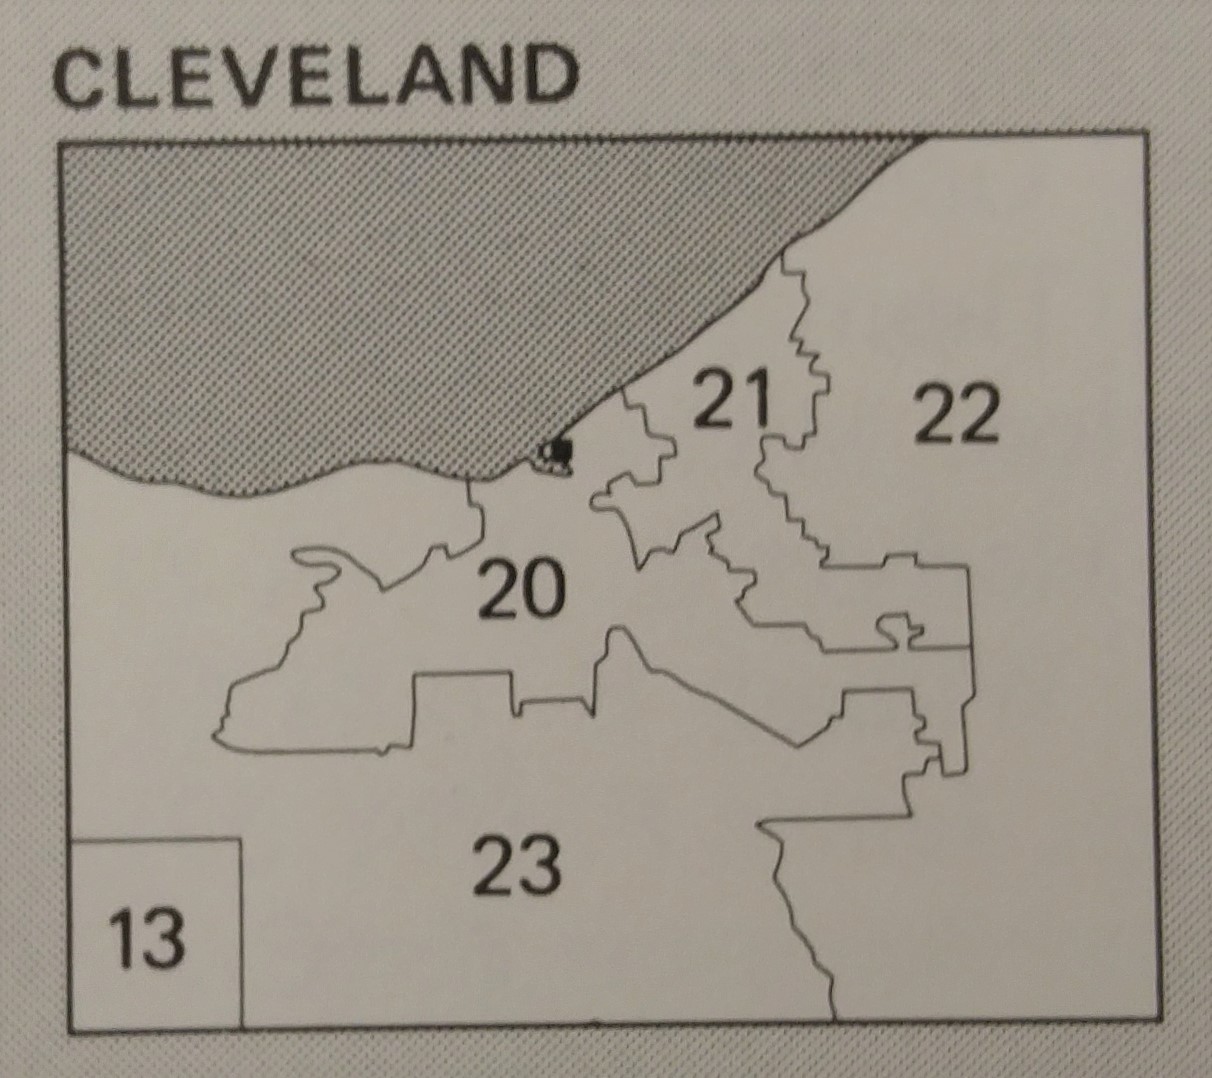 District 20 in 1976